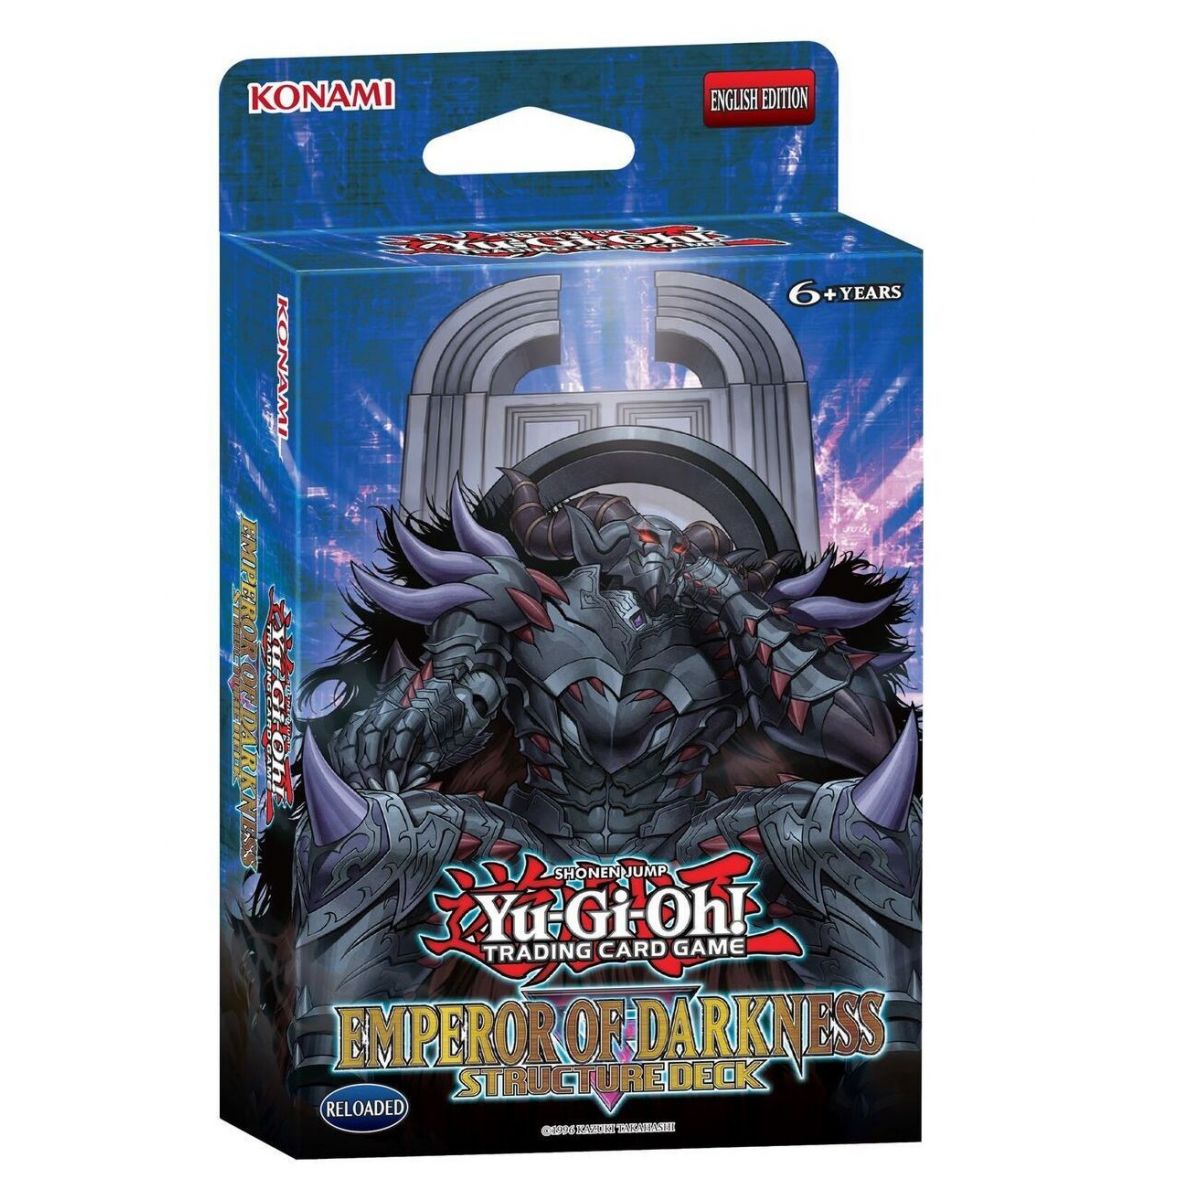 *US Print SEALED* Yu-Gi-Oh! - Structure Deck - Emperor of Darkness - Unlimited